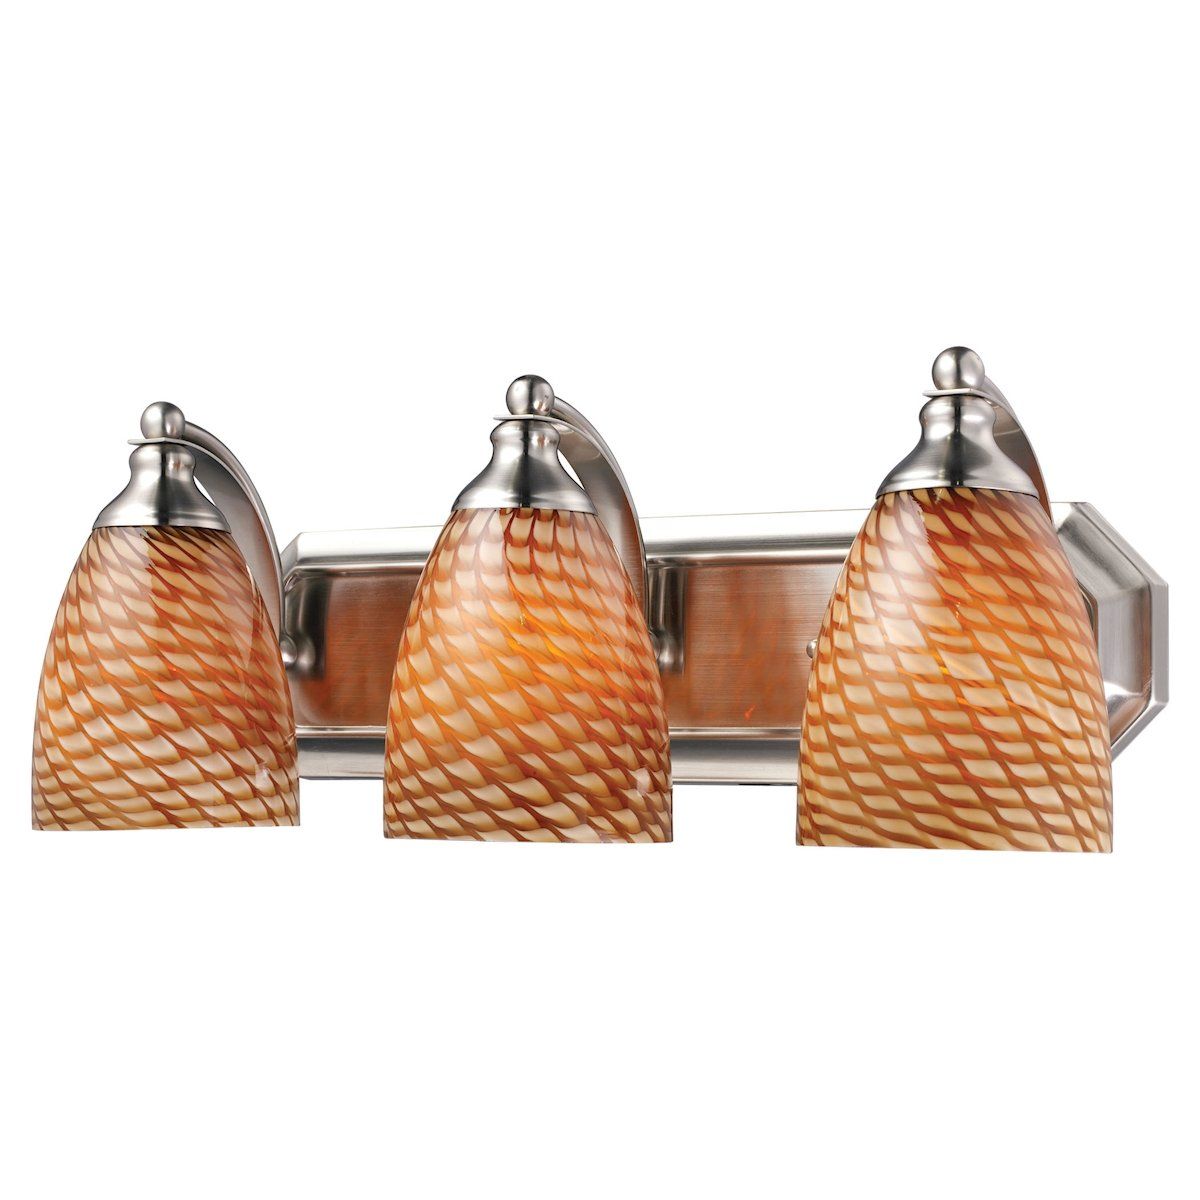 Bath And Spa 3 Light Vanity In Satin Nickel And Cocoa Glass Wall Elk Lighting 